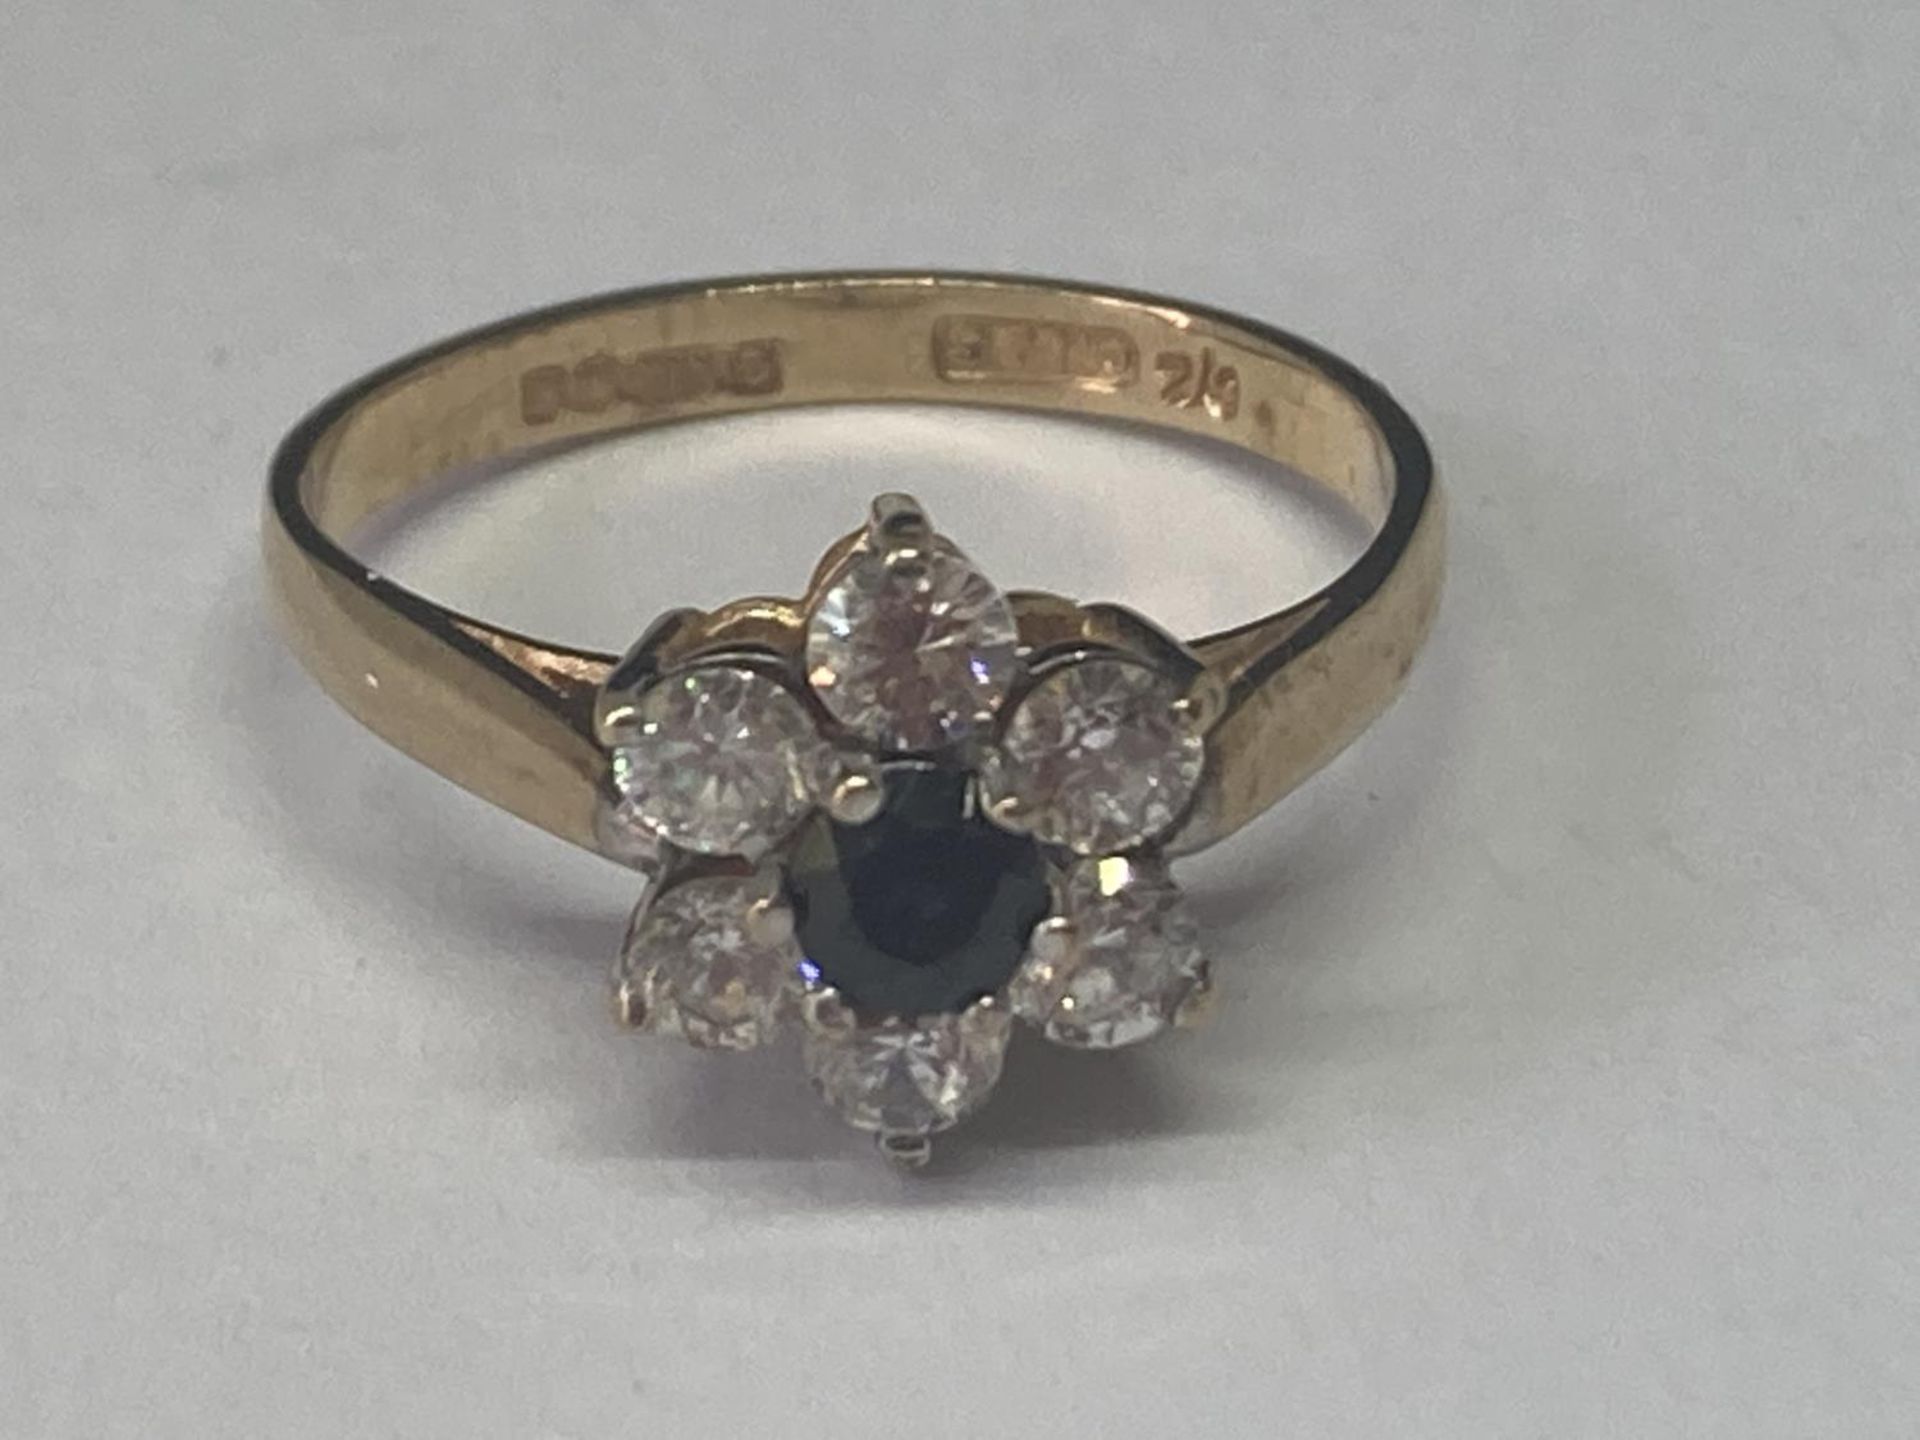 A 9 CARAT GOLD RING WITH A SAPPHIRE SURROUNDED BY CUBIC ZIRCONIAS SIZE N